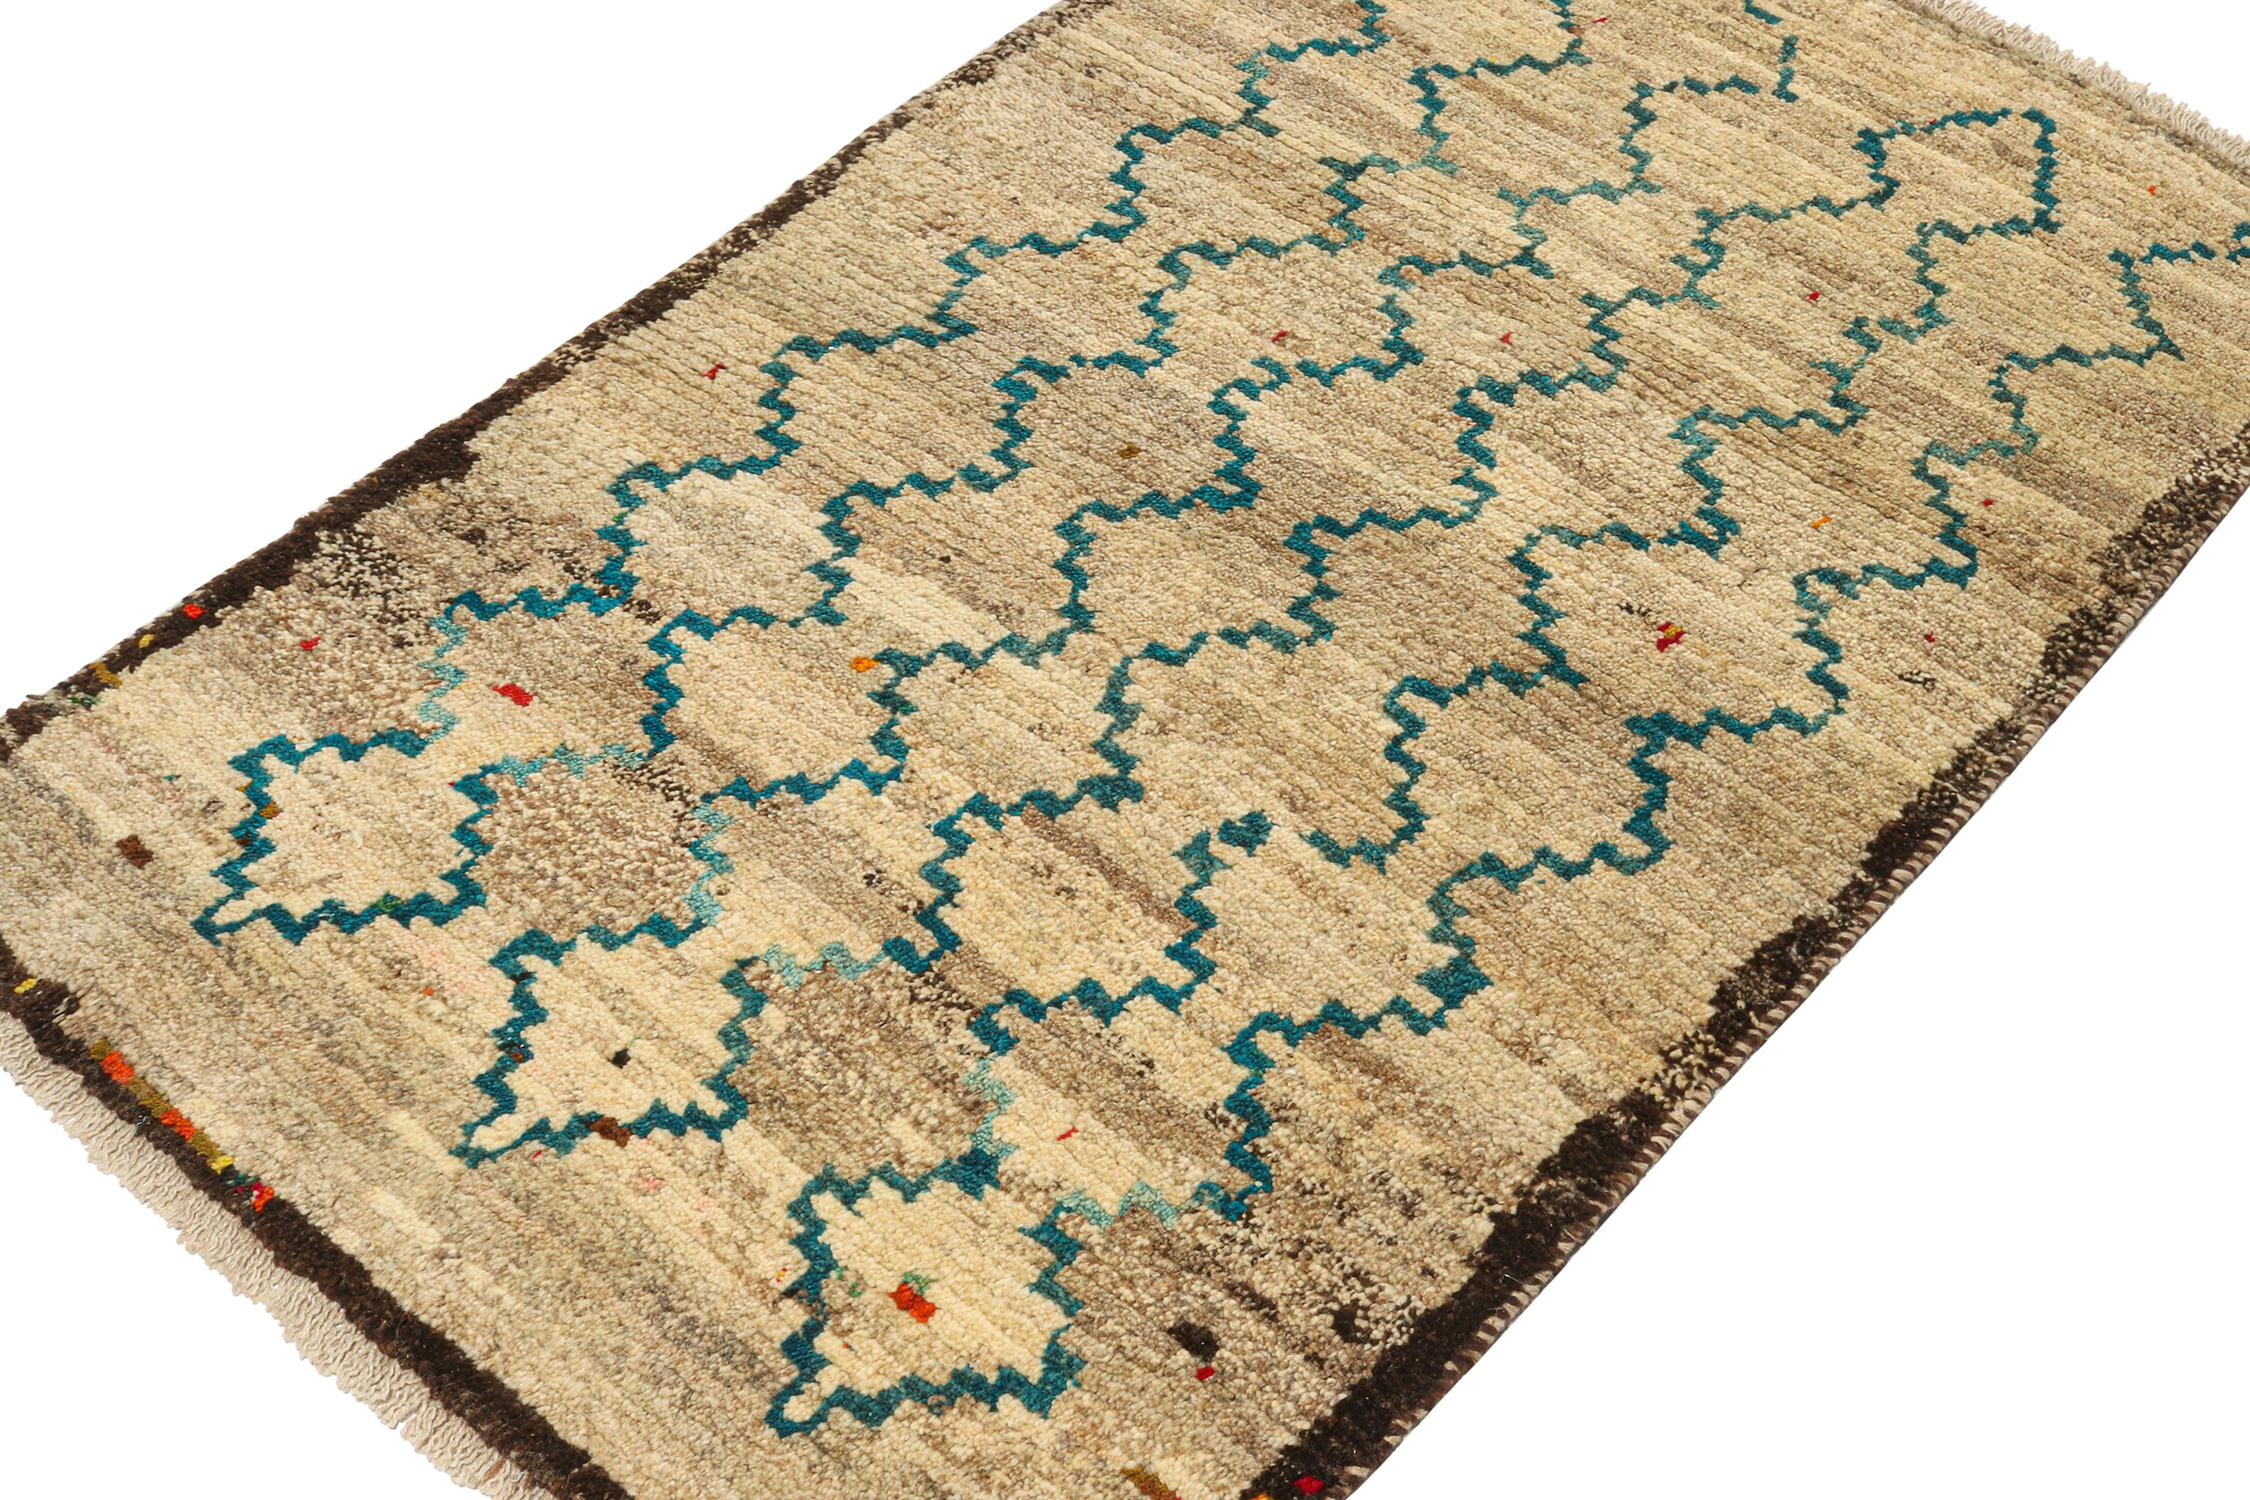 This vintage 3x5 Gabbeh Persian rug is from the latest entries in Rug & Kilim’s rare tribal curations. Hand-knotted in wool circa 1950-1960.

On the design:

This tribal provenance is one of the most primitive, and collectible shabby-chic styles